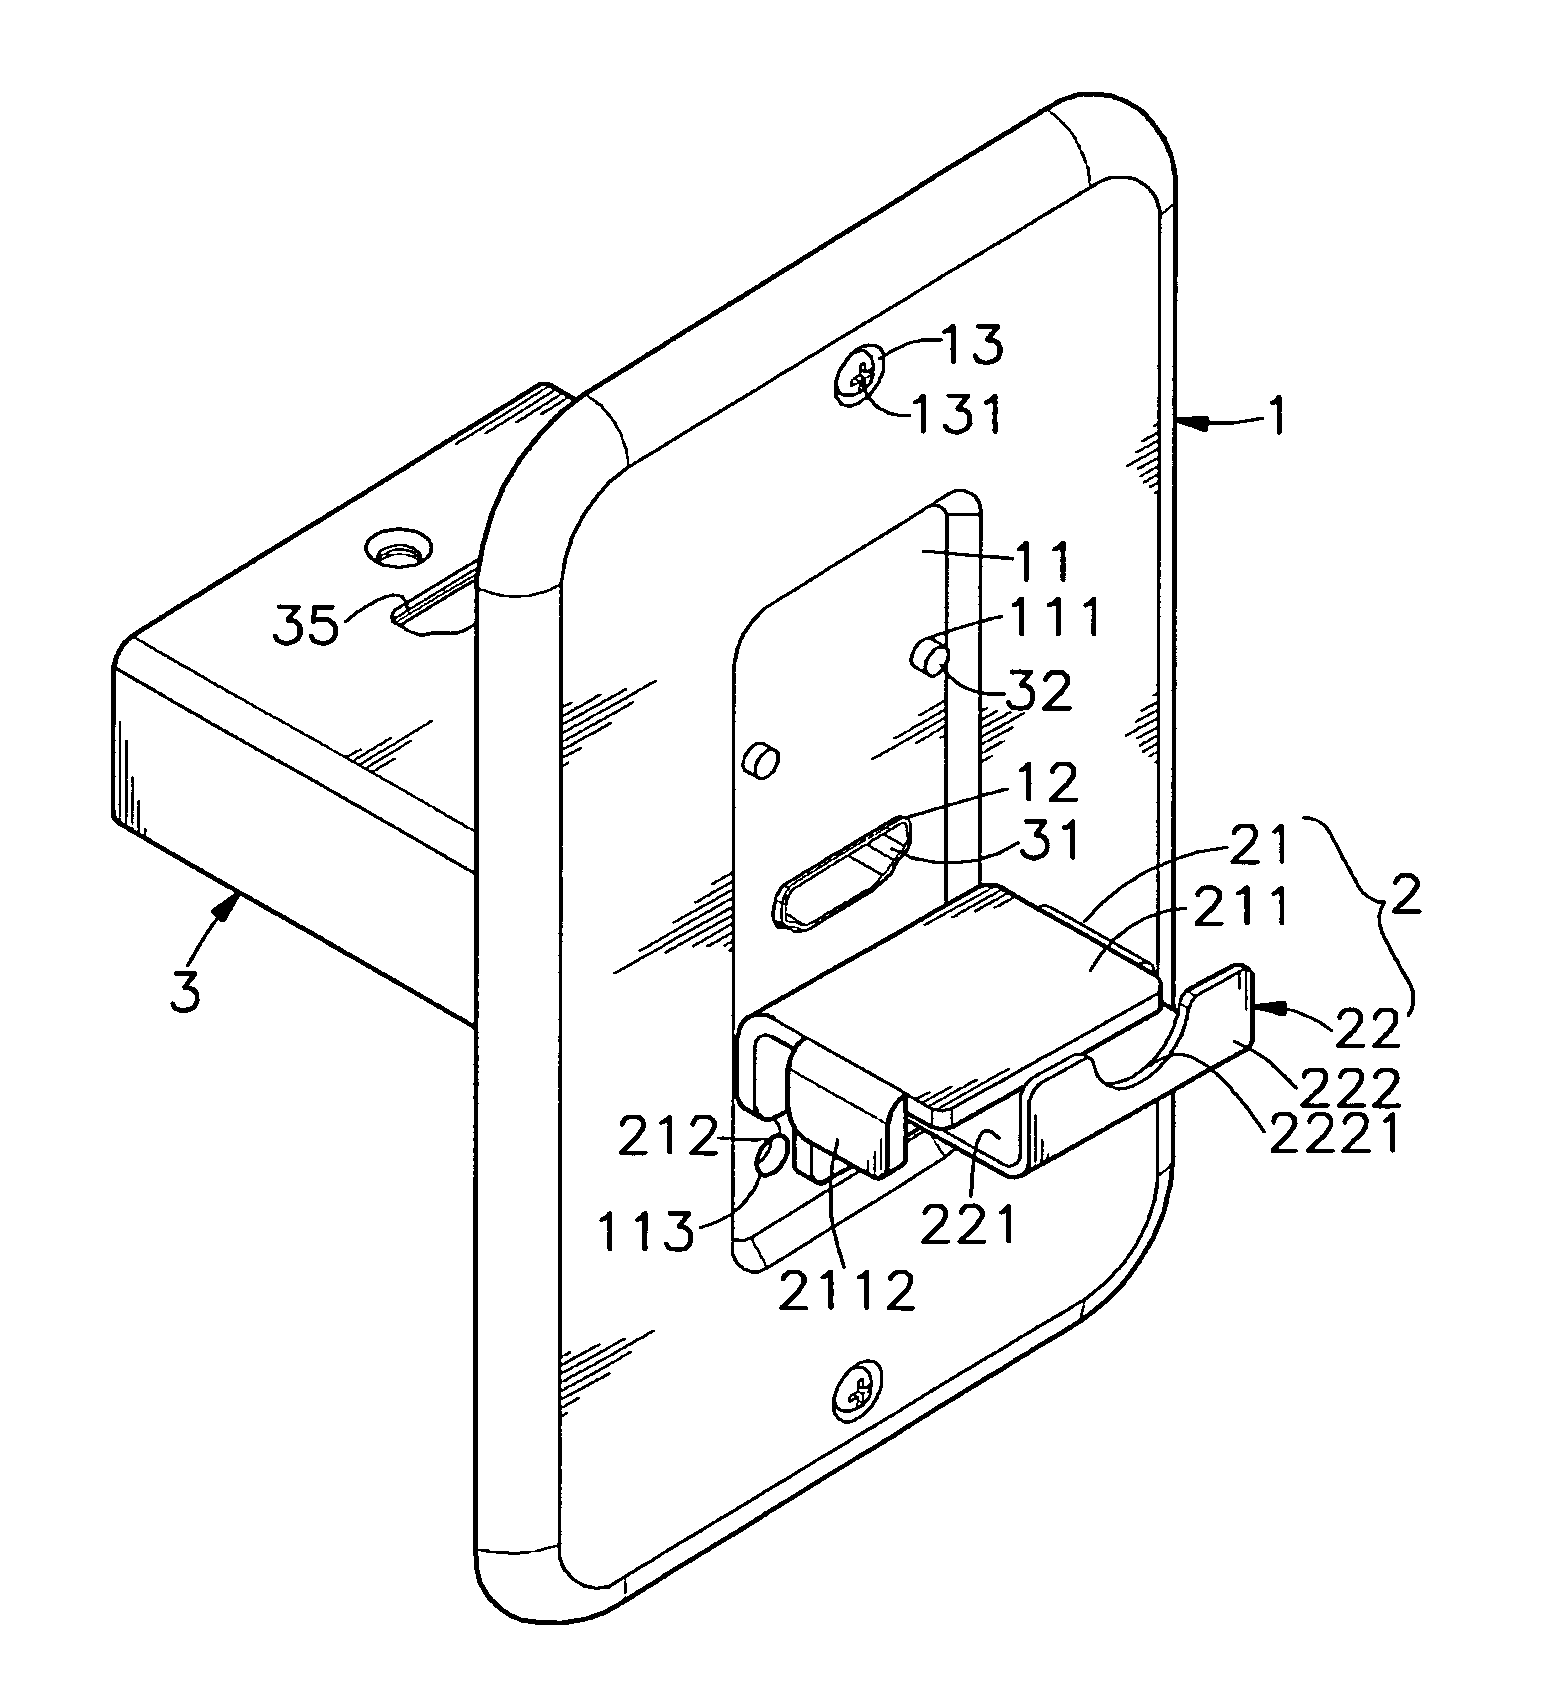 Wall plate assembly